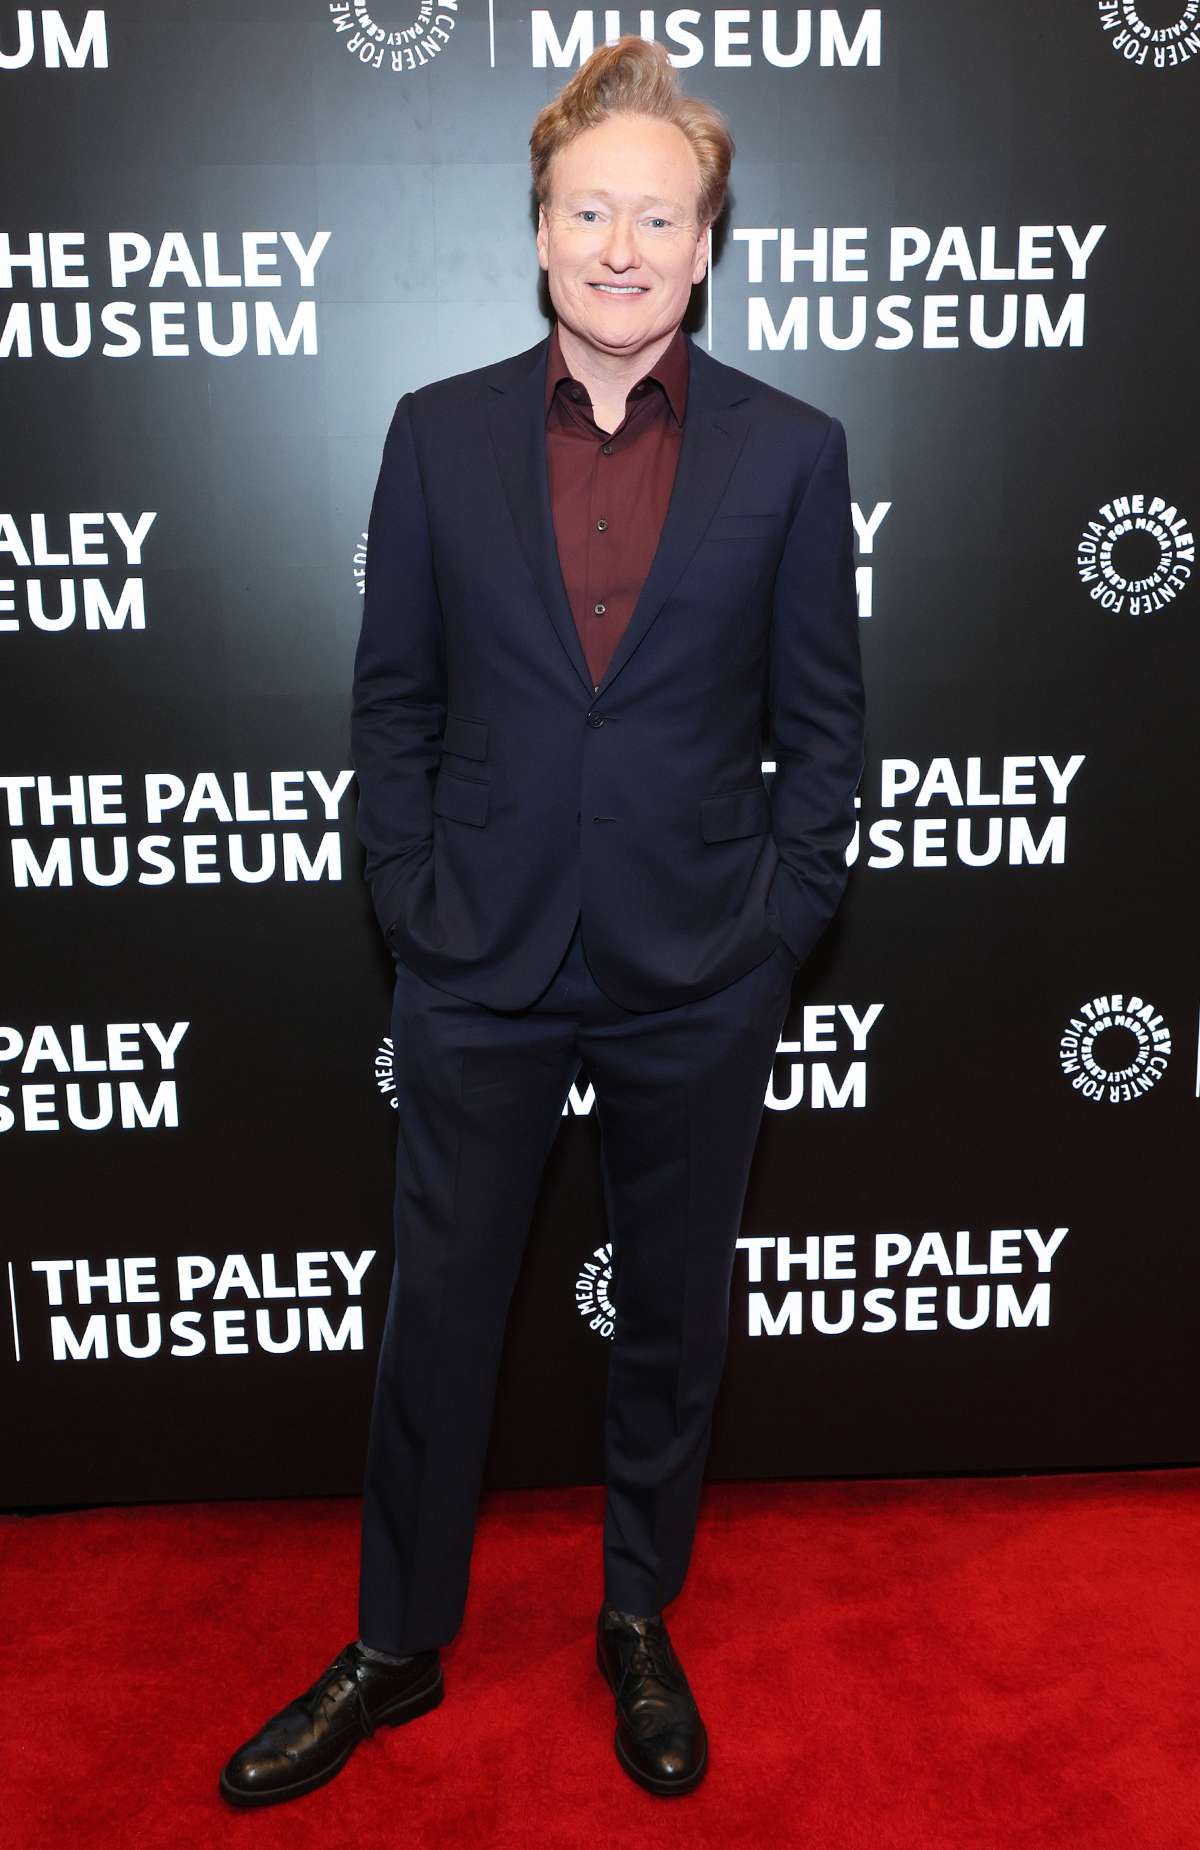 Conan O'Brien attends the PaleyLive - Globetrotting & Podcasting: Conan O'Brien's Life After Late-Night TV event at The Paley Museum on April 11, 2024 in New York City. 